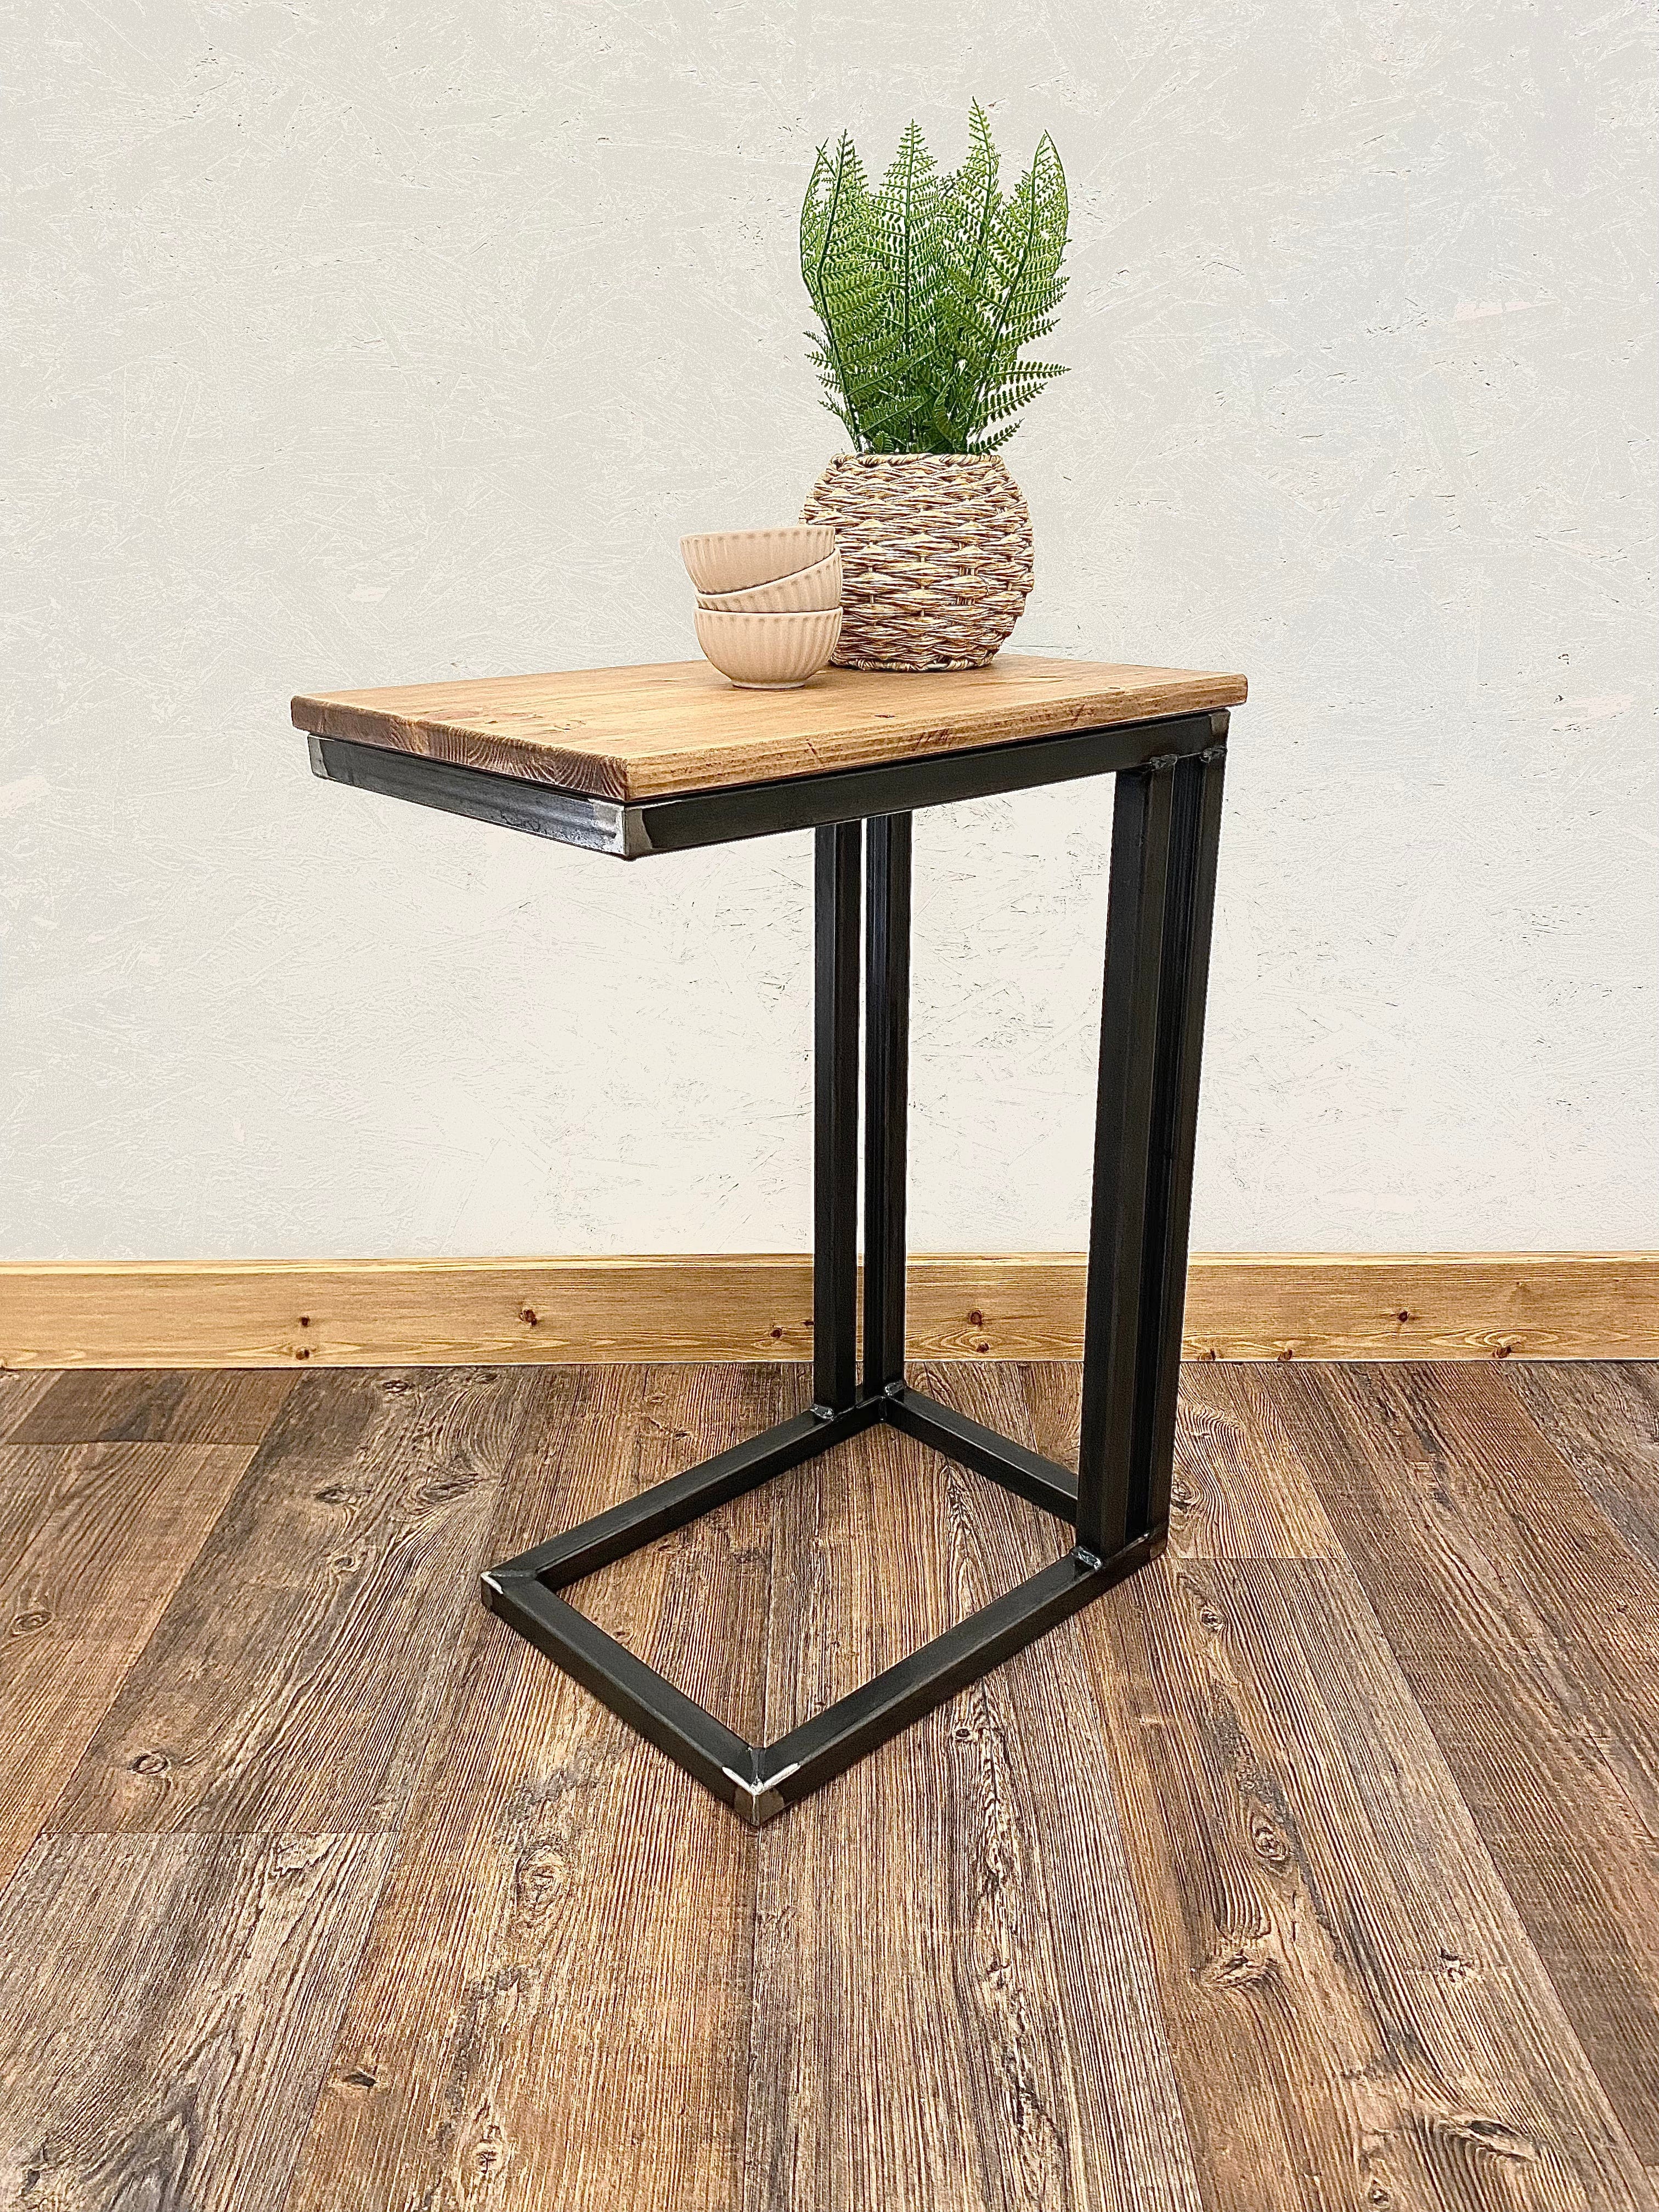 Rustic C Shaped Side table - Sofa table - Laptop table C shaped laptop table RSD Furniture   